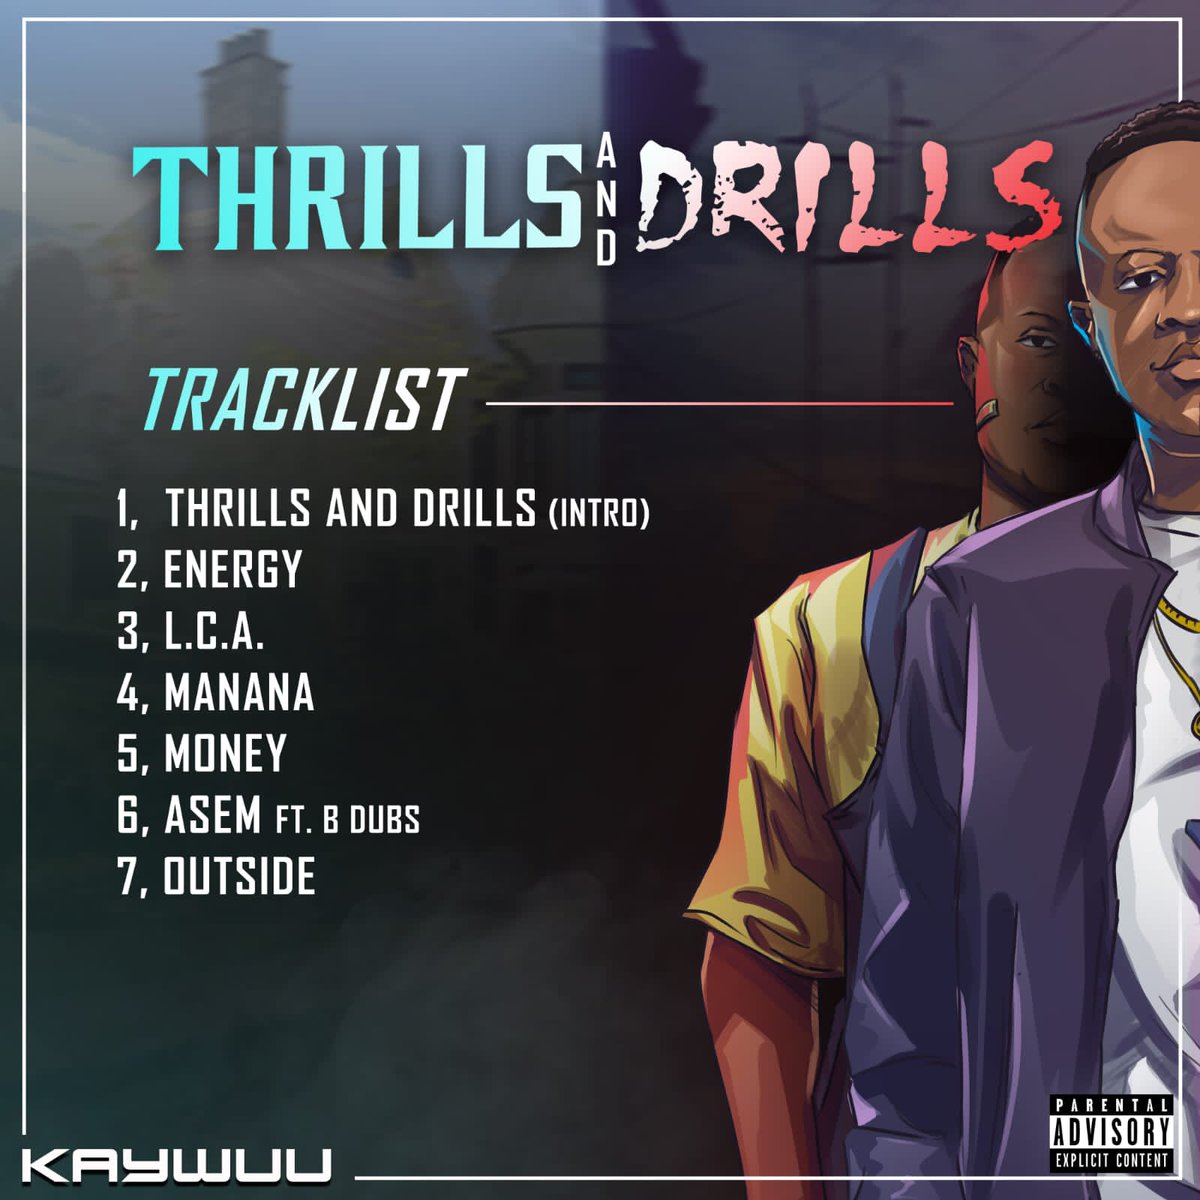 What a classic project 💥💥💥

#ThrillsAndDrillsEP by @Kaywuumusic